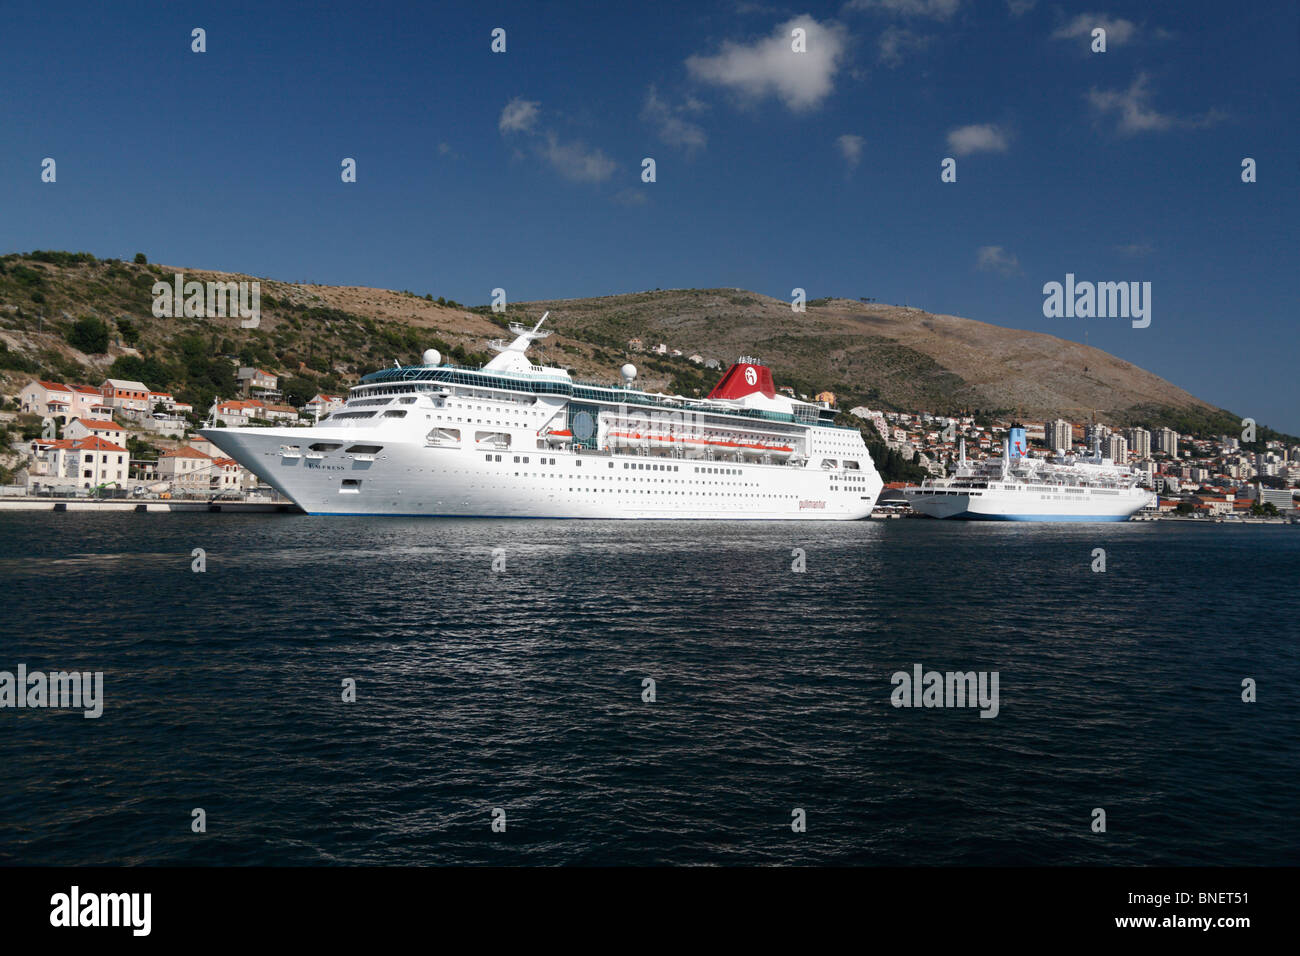 Pullmantur cruise ship ocean luxury liner Empress moored in dock at Dubrovnik harbour Croatia ships Thomson Celebration in rear. Stock Photo